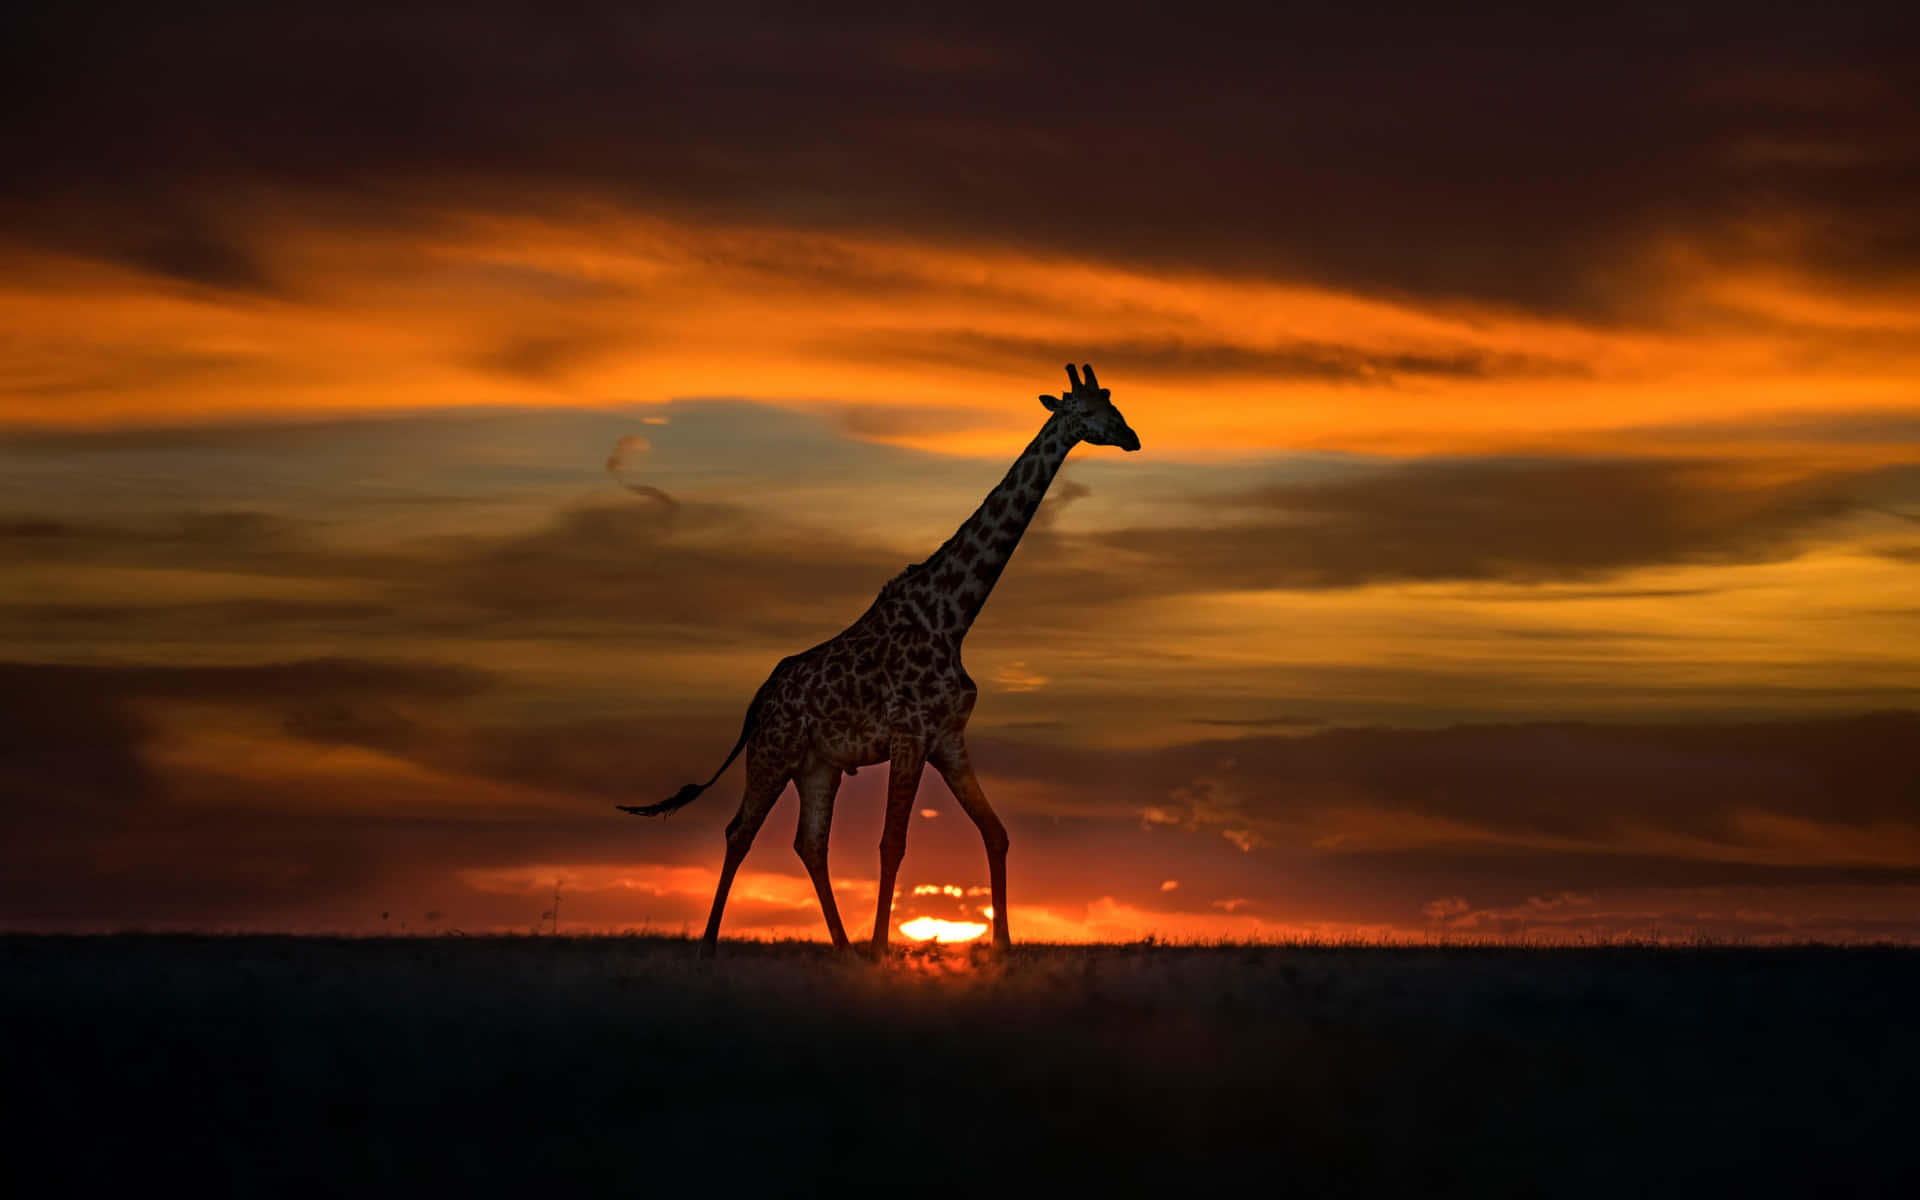 Experience the beauty of African wildlife up close. Wallpaper